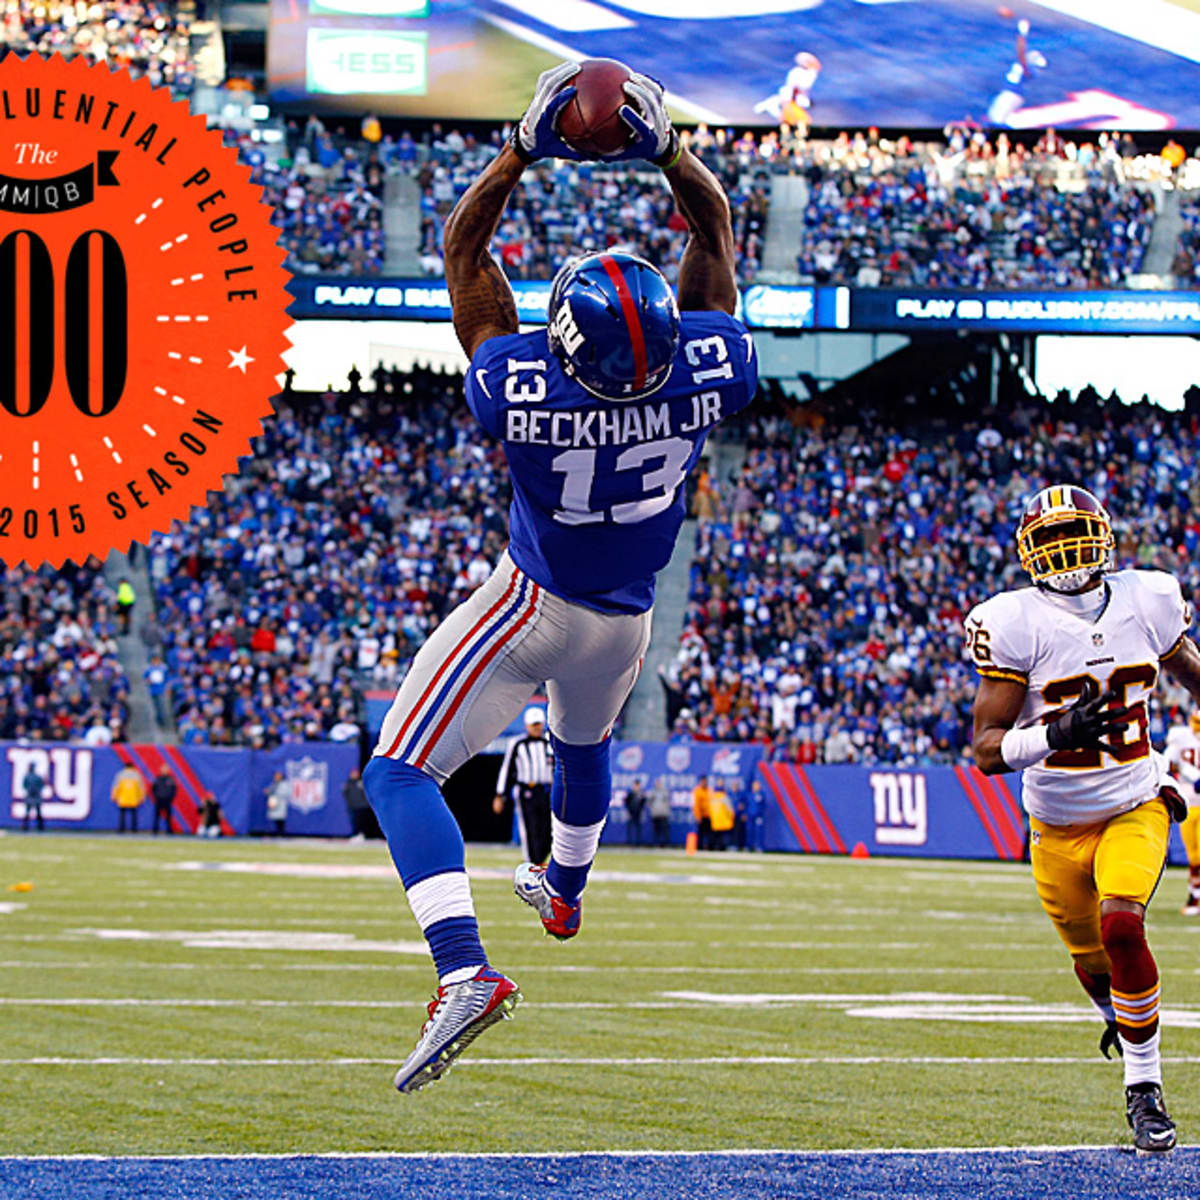 Even Under Microscope, Catch by Giants' Odell Beckham Jr. Earns Applause -  The New York Times